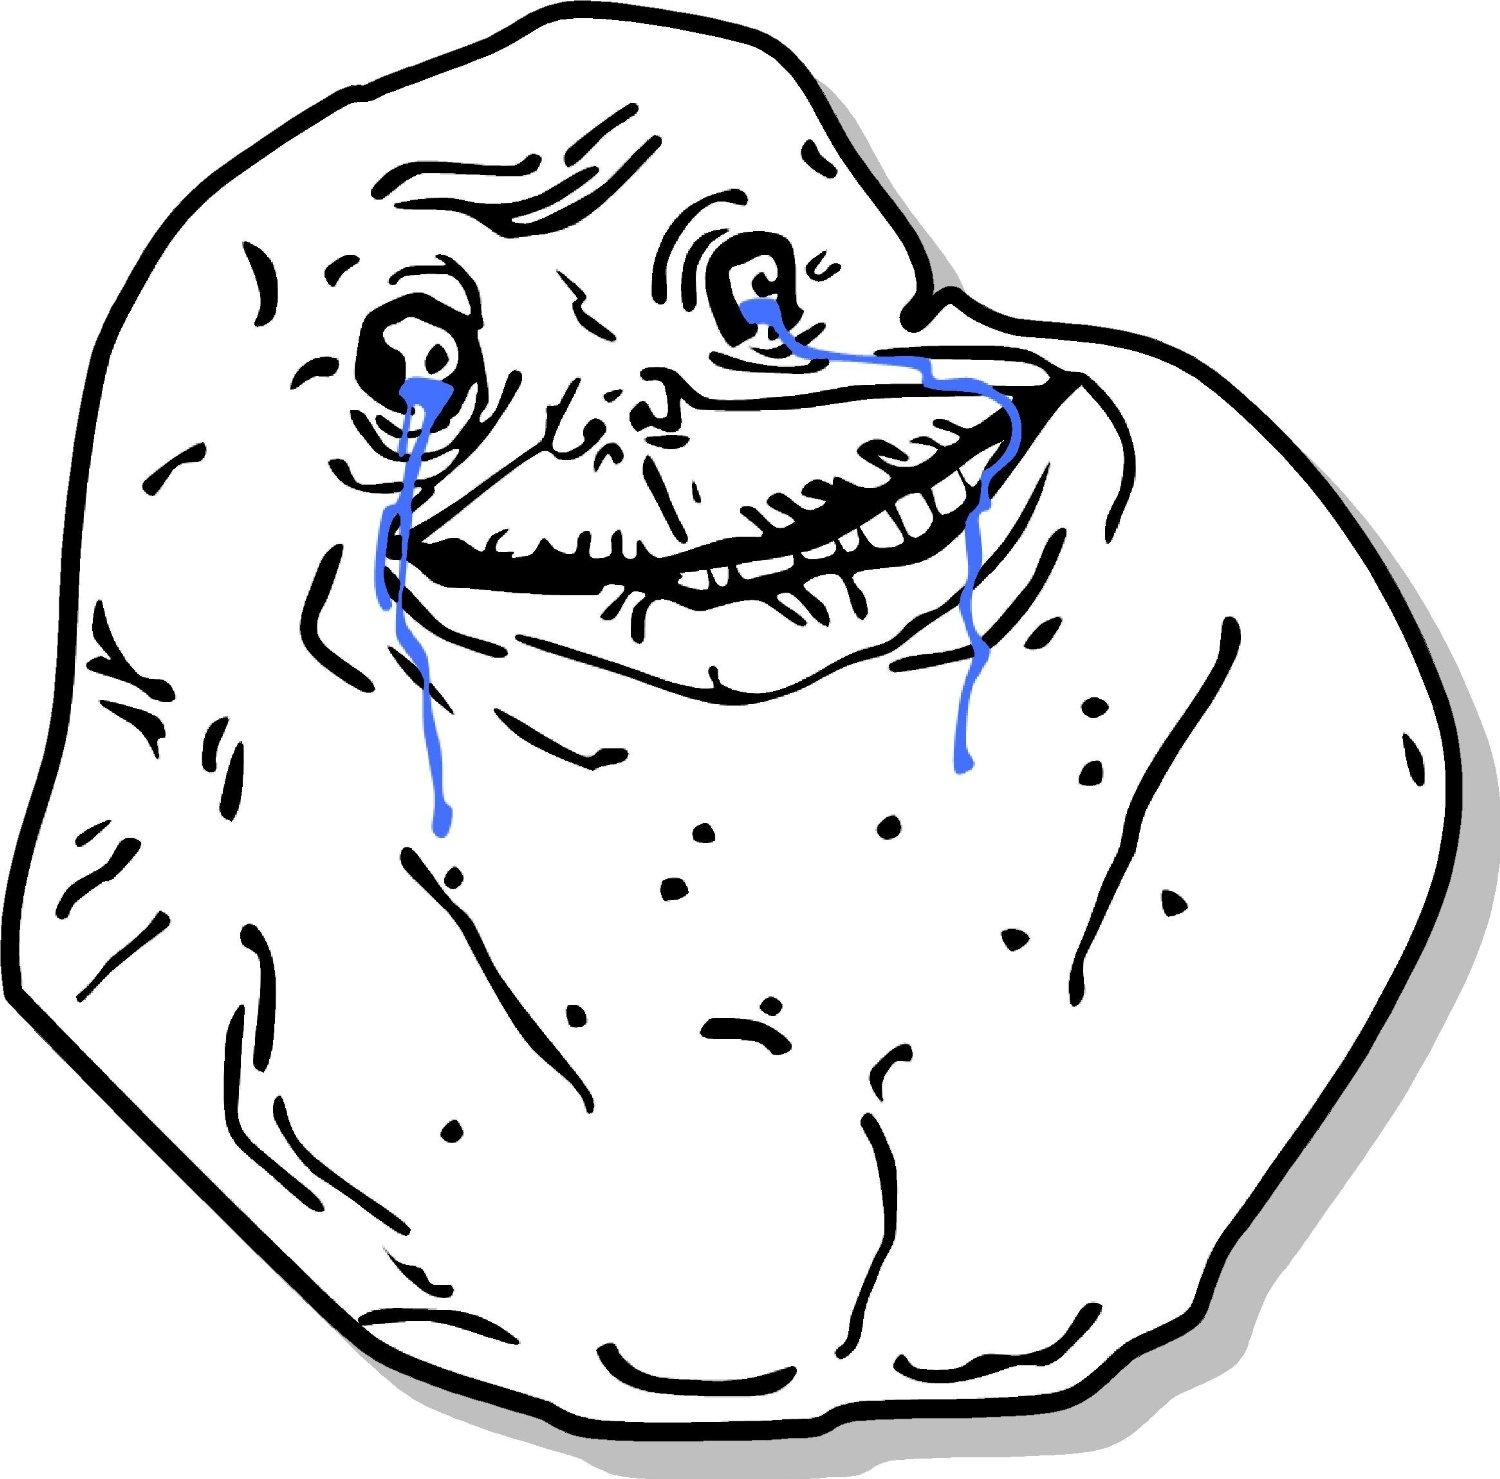 Meme Forever Alone PNG by Agu